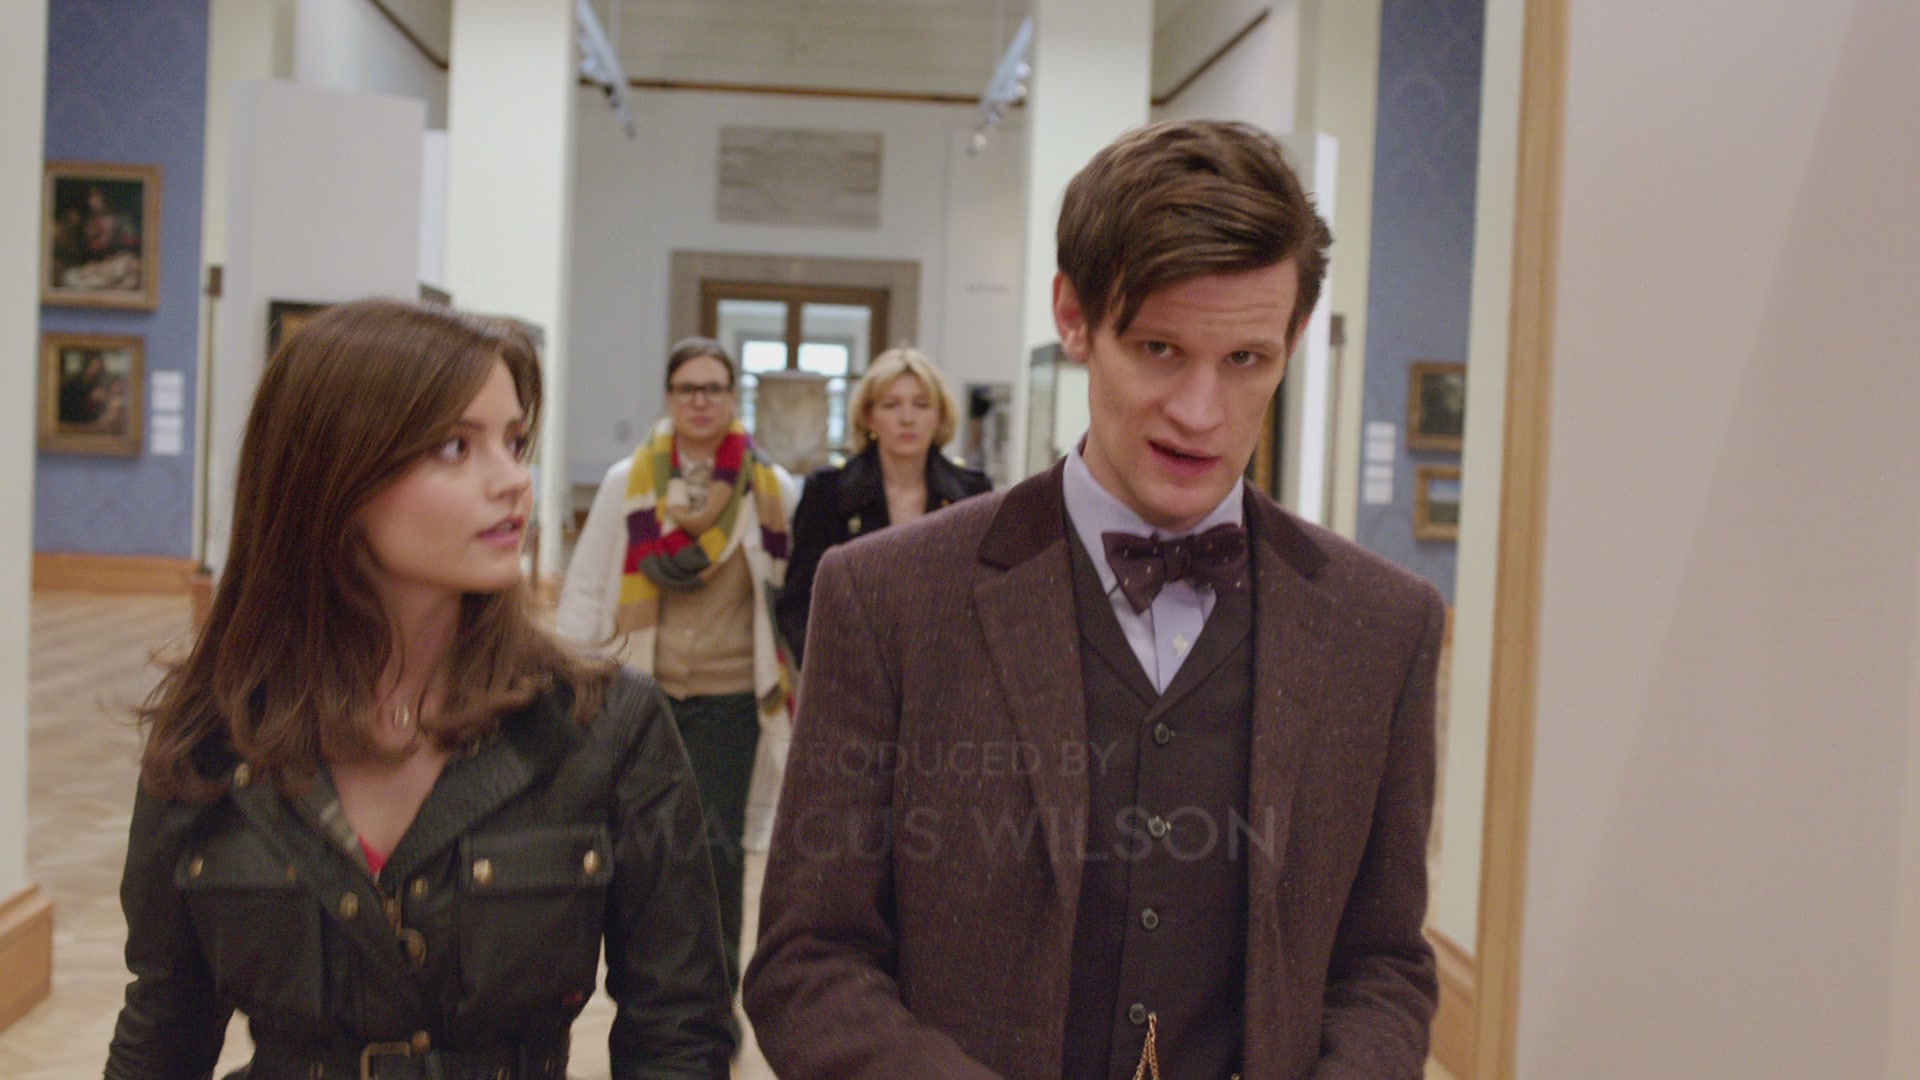 DayOfTheDoctor-Caps-0160.jpg